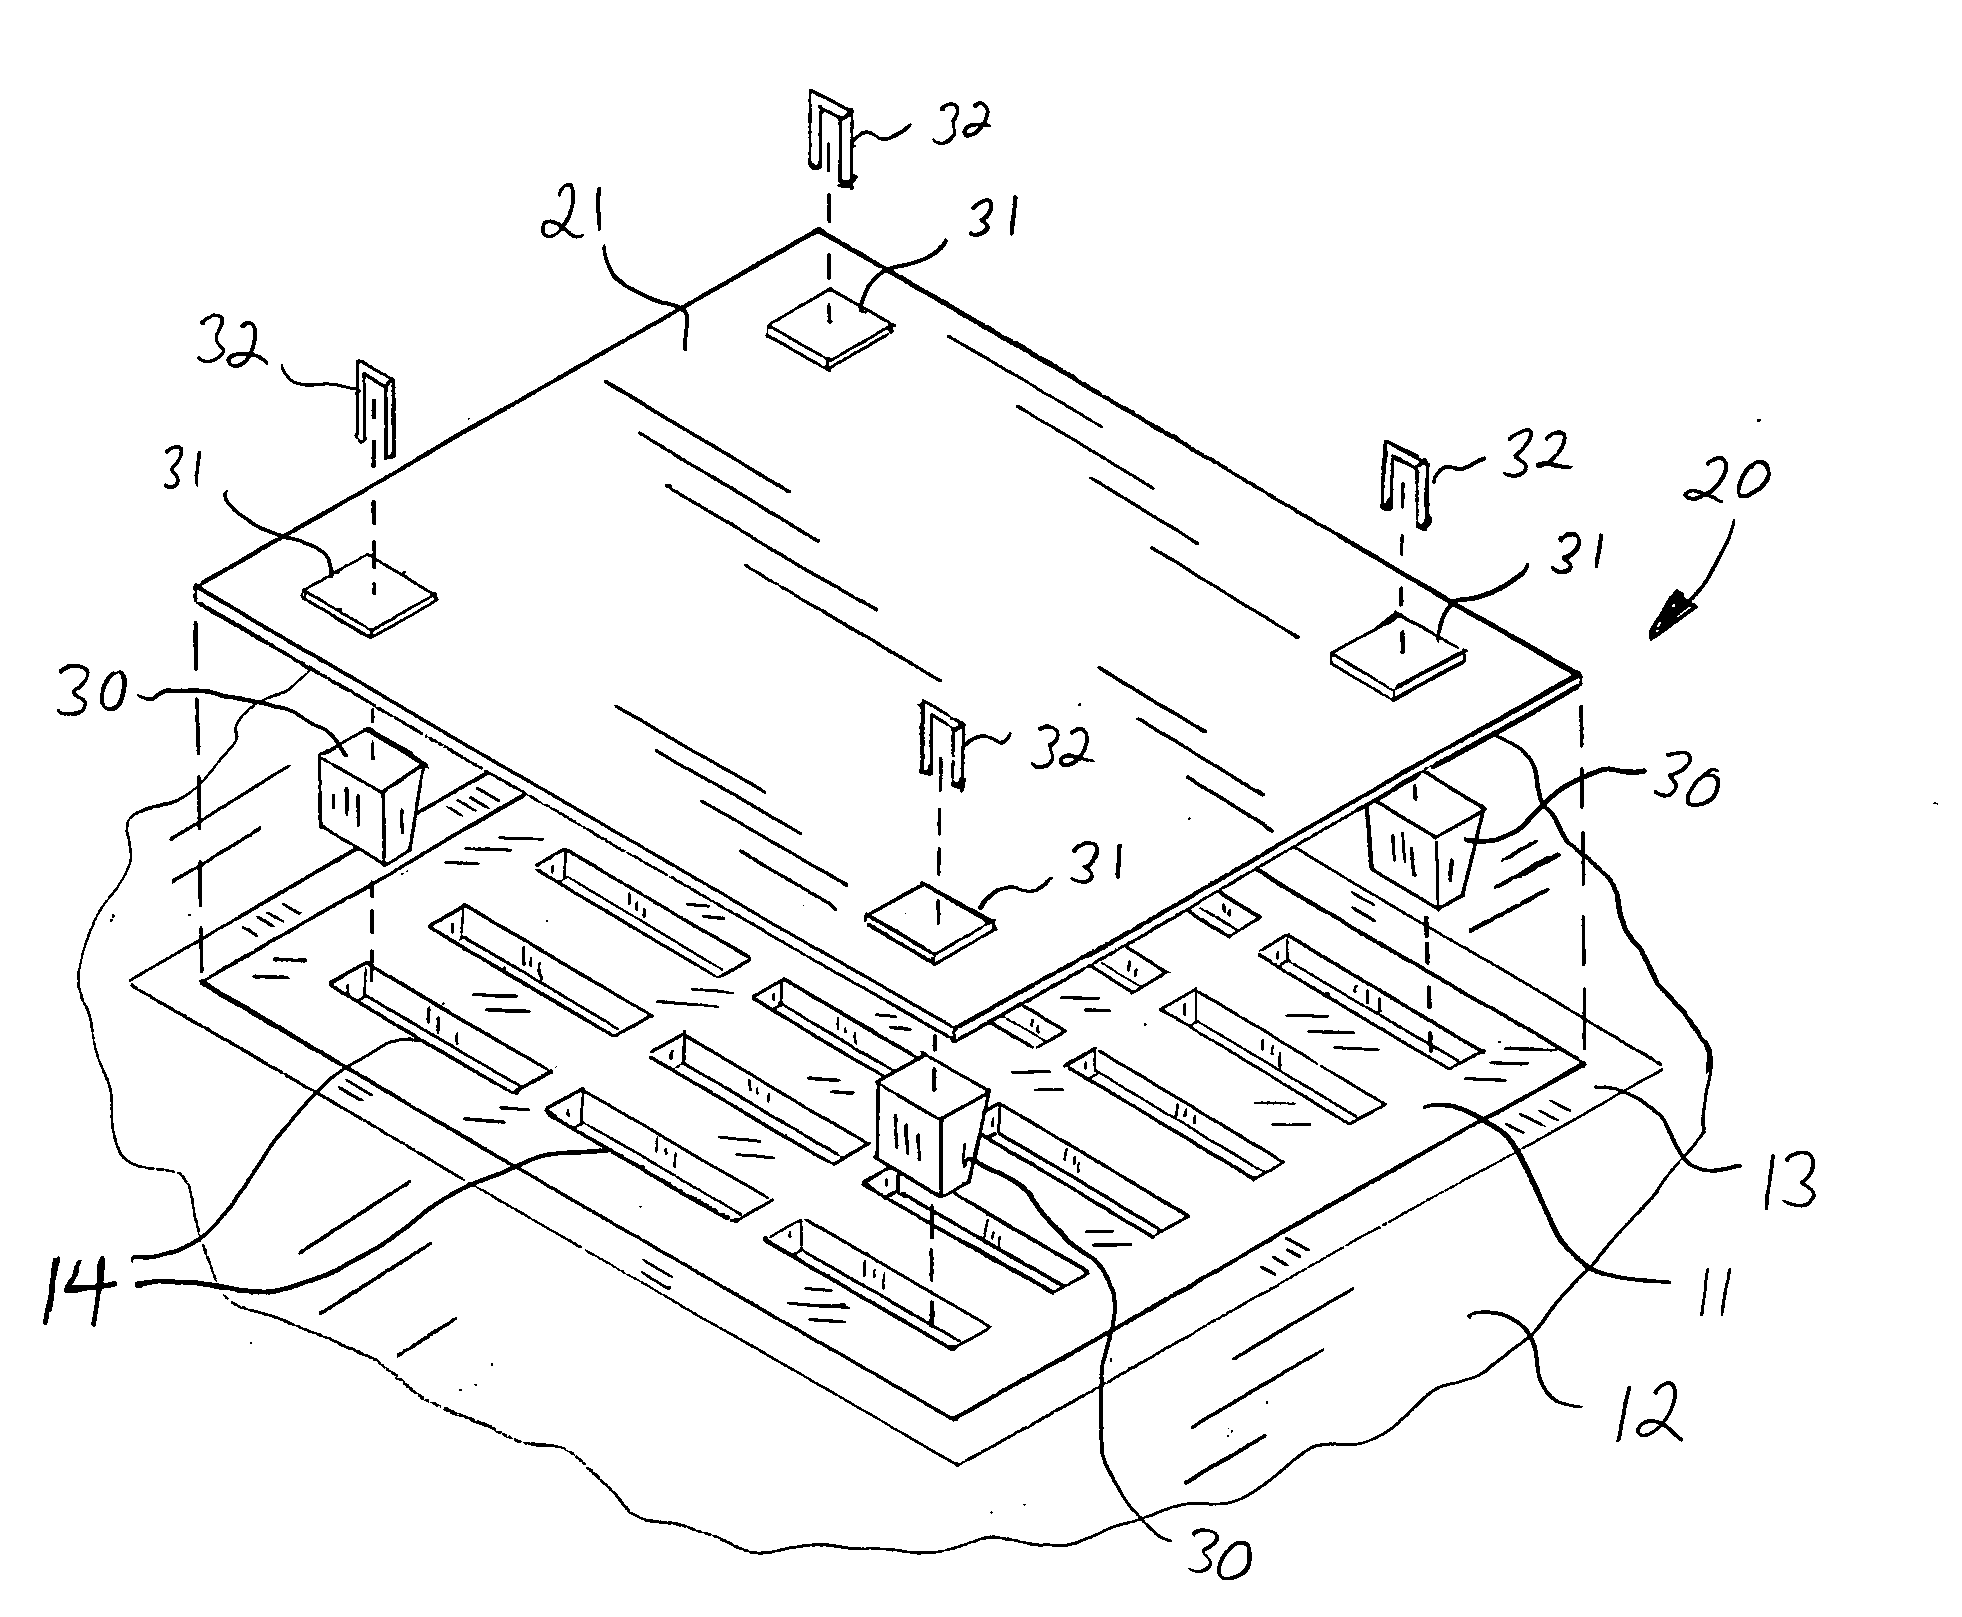 Drain grate filter assembly with compressible anchors